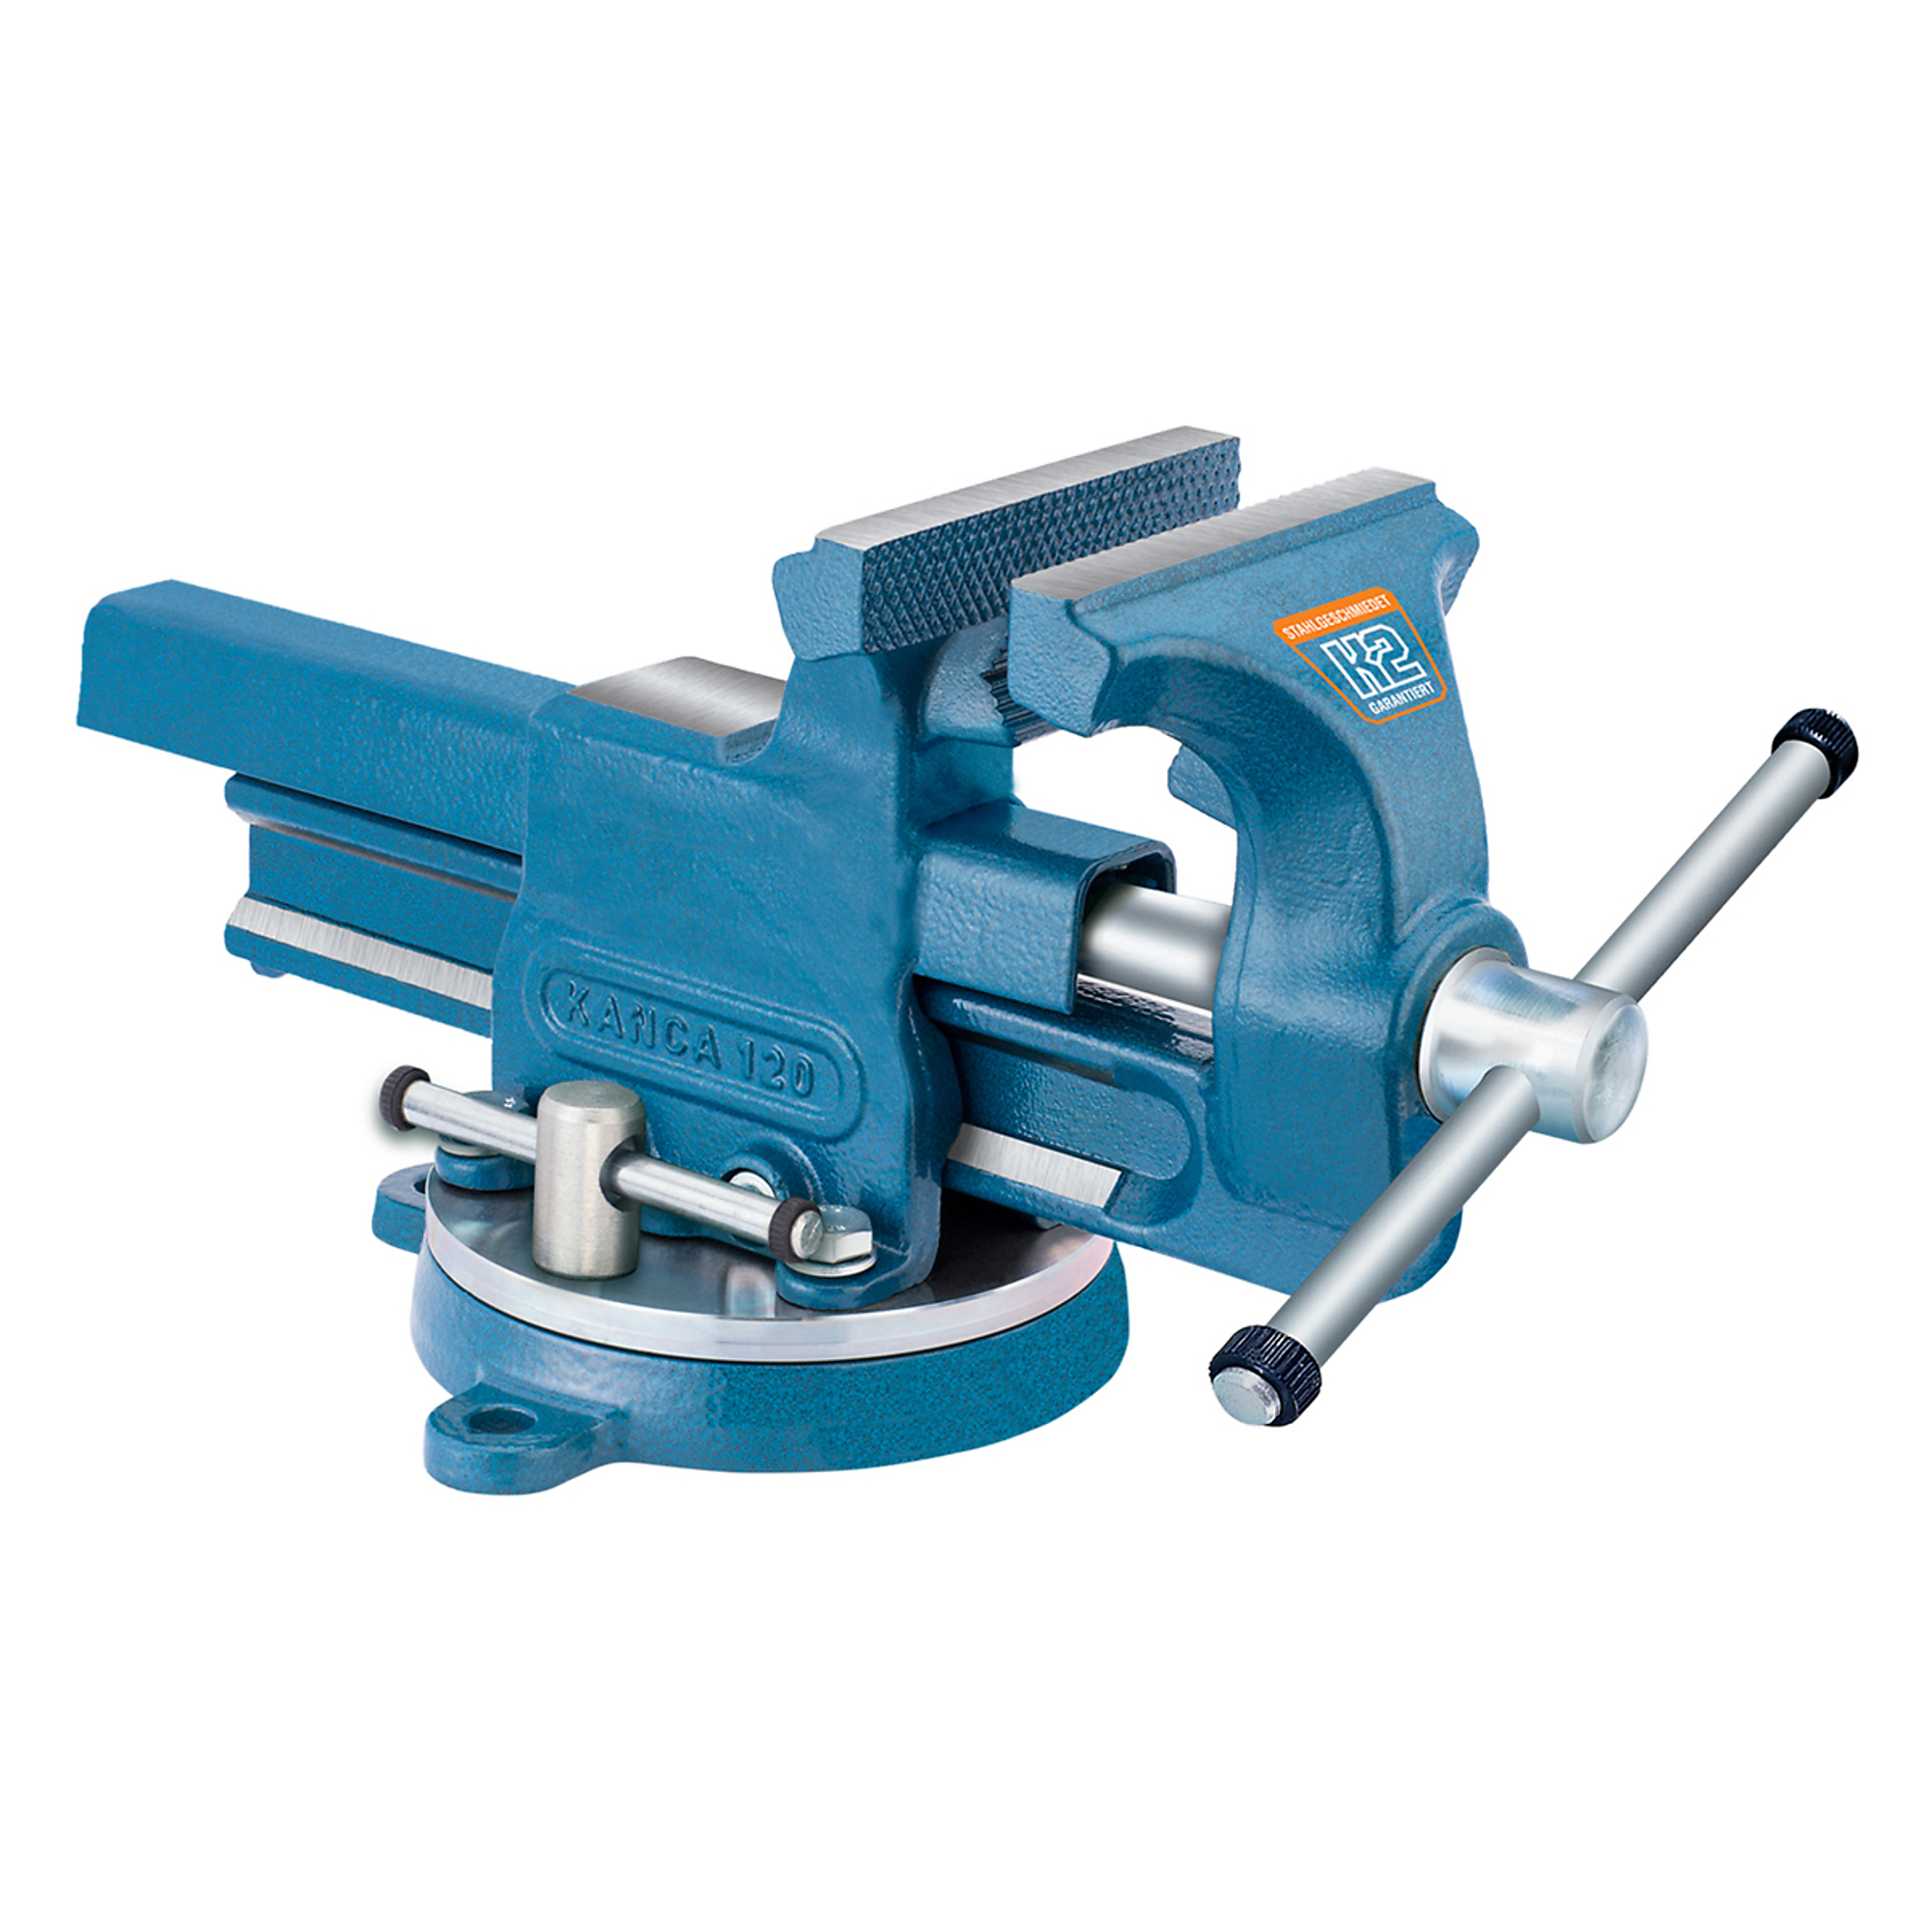 KANCA, K2 PLUMBERS VISE w. SWIVEL BASE 100 MM - 4Inch, Jaw Width 4 in, Jaw Capacity 4.5 in, Model K2 Pipe and Bench Vise